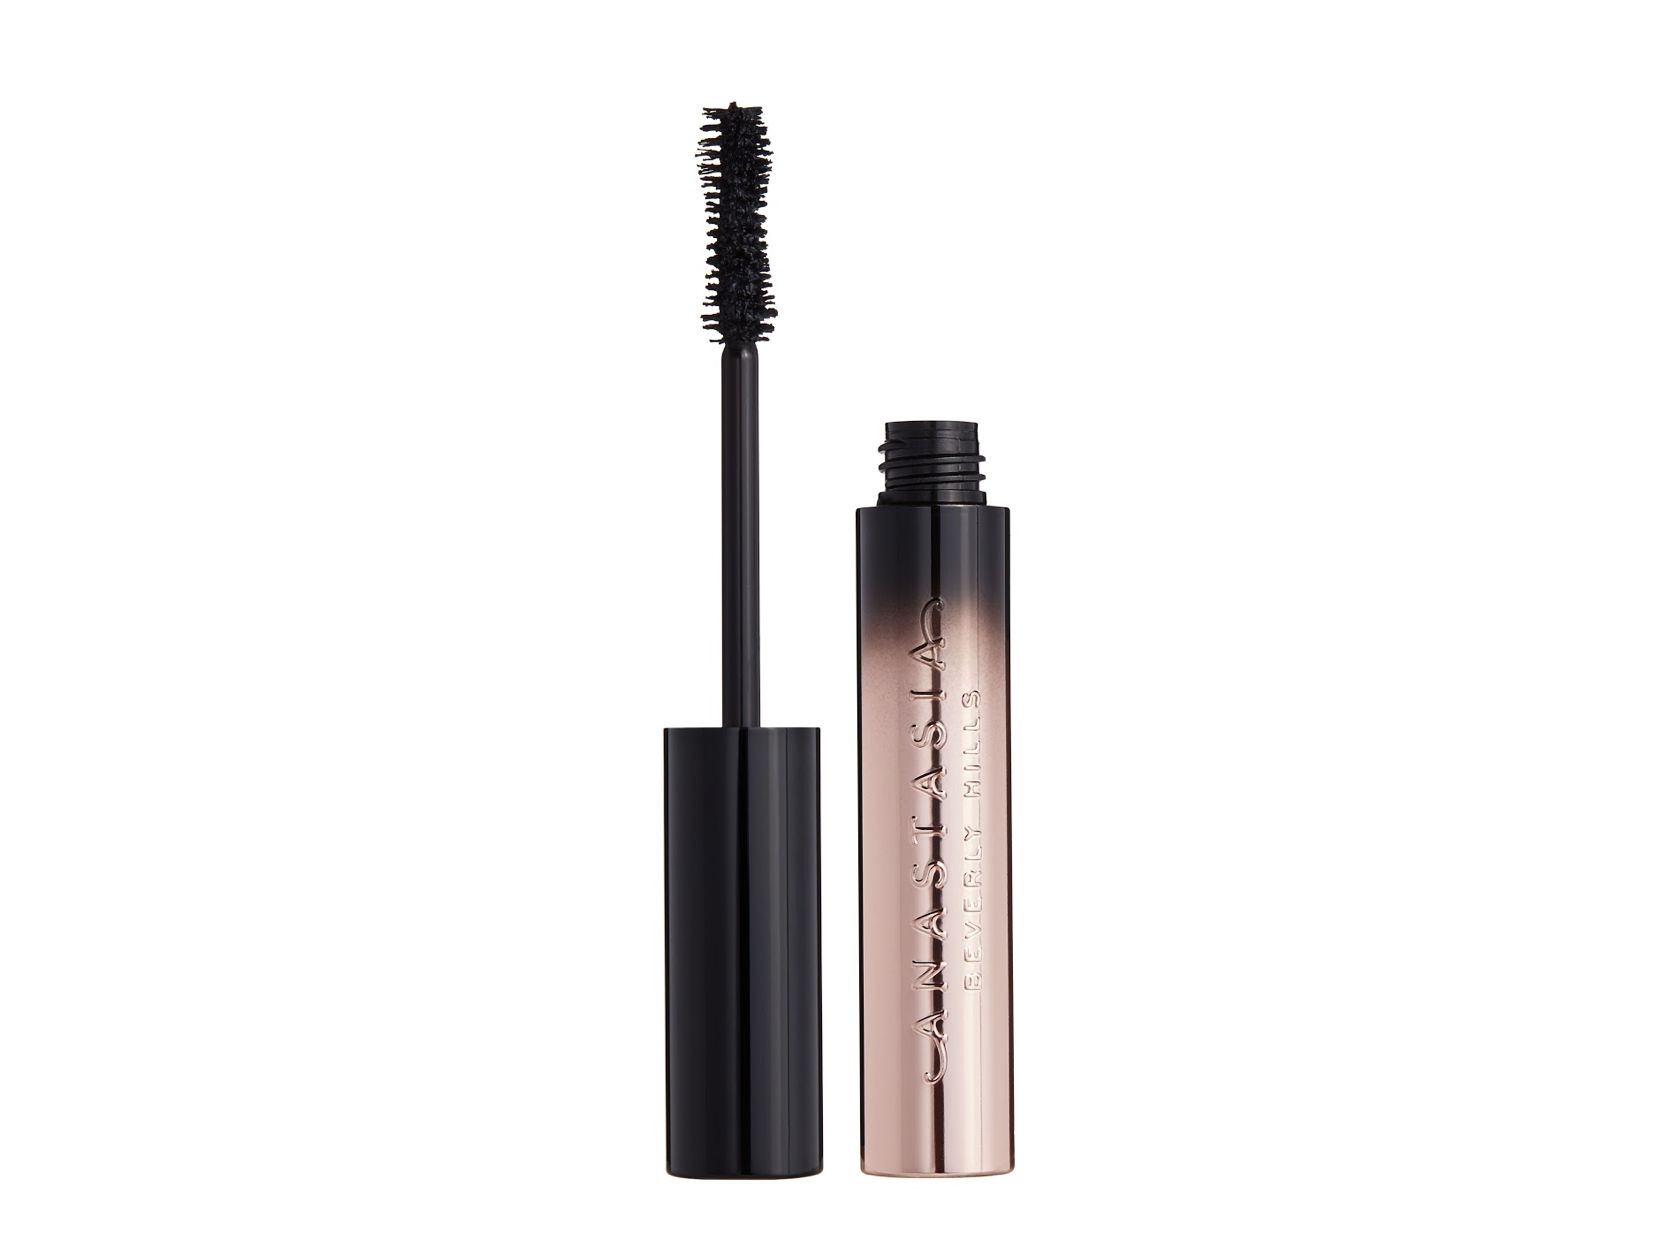 7 New Mascaras You Won't Want To Take Off